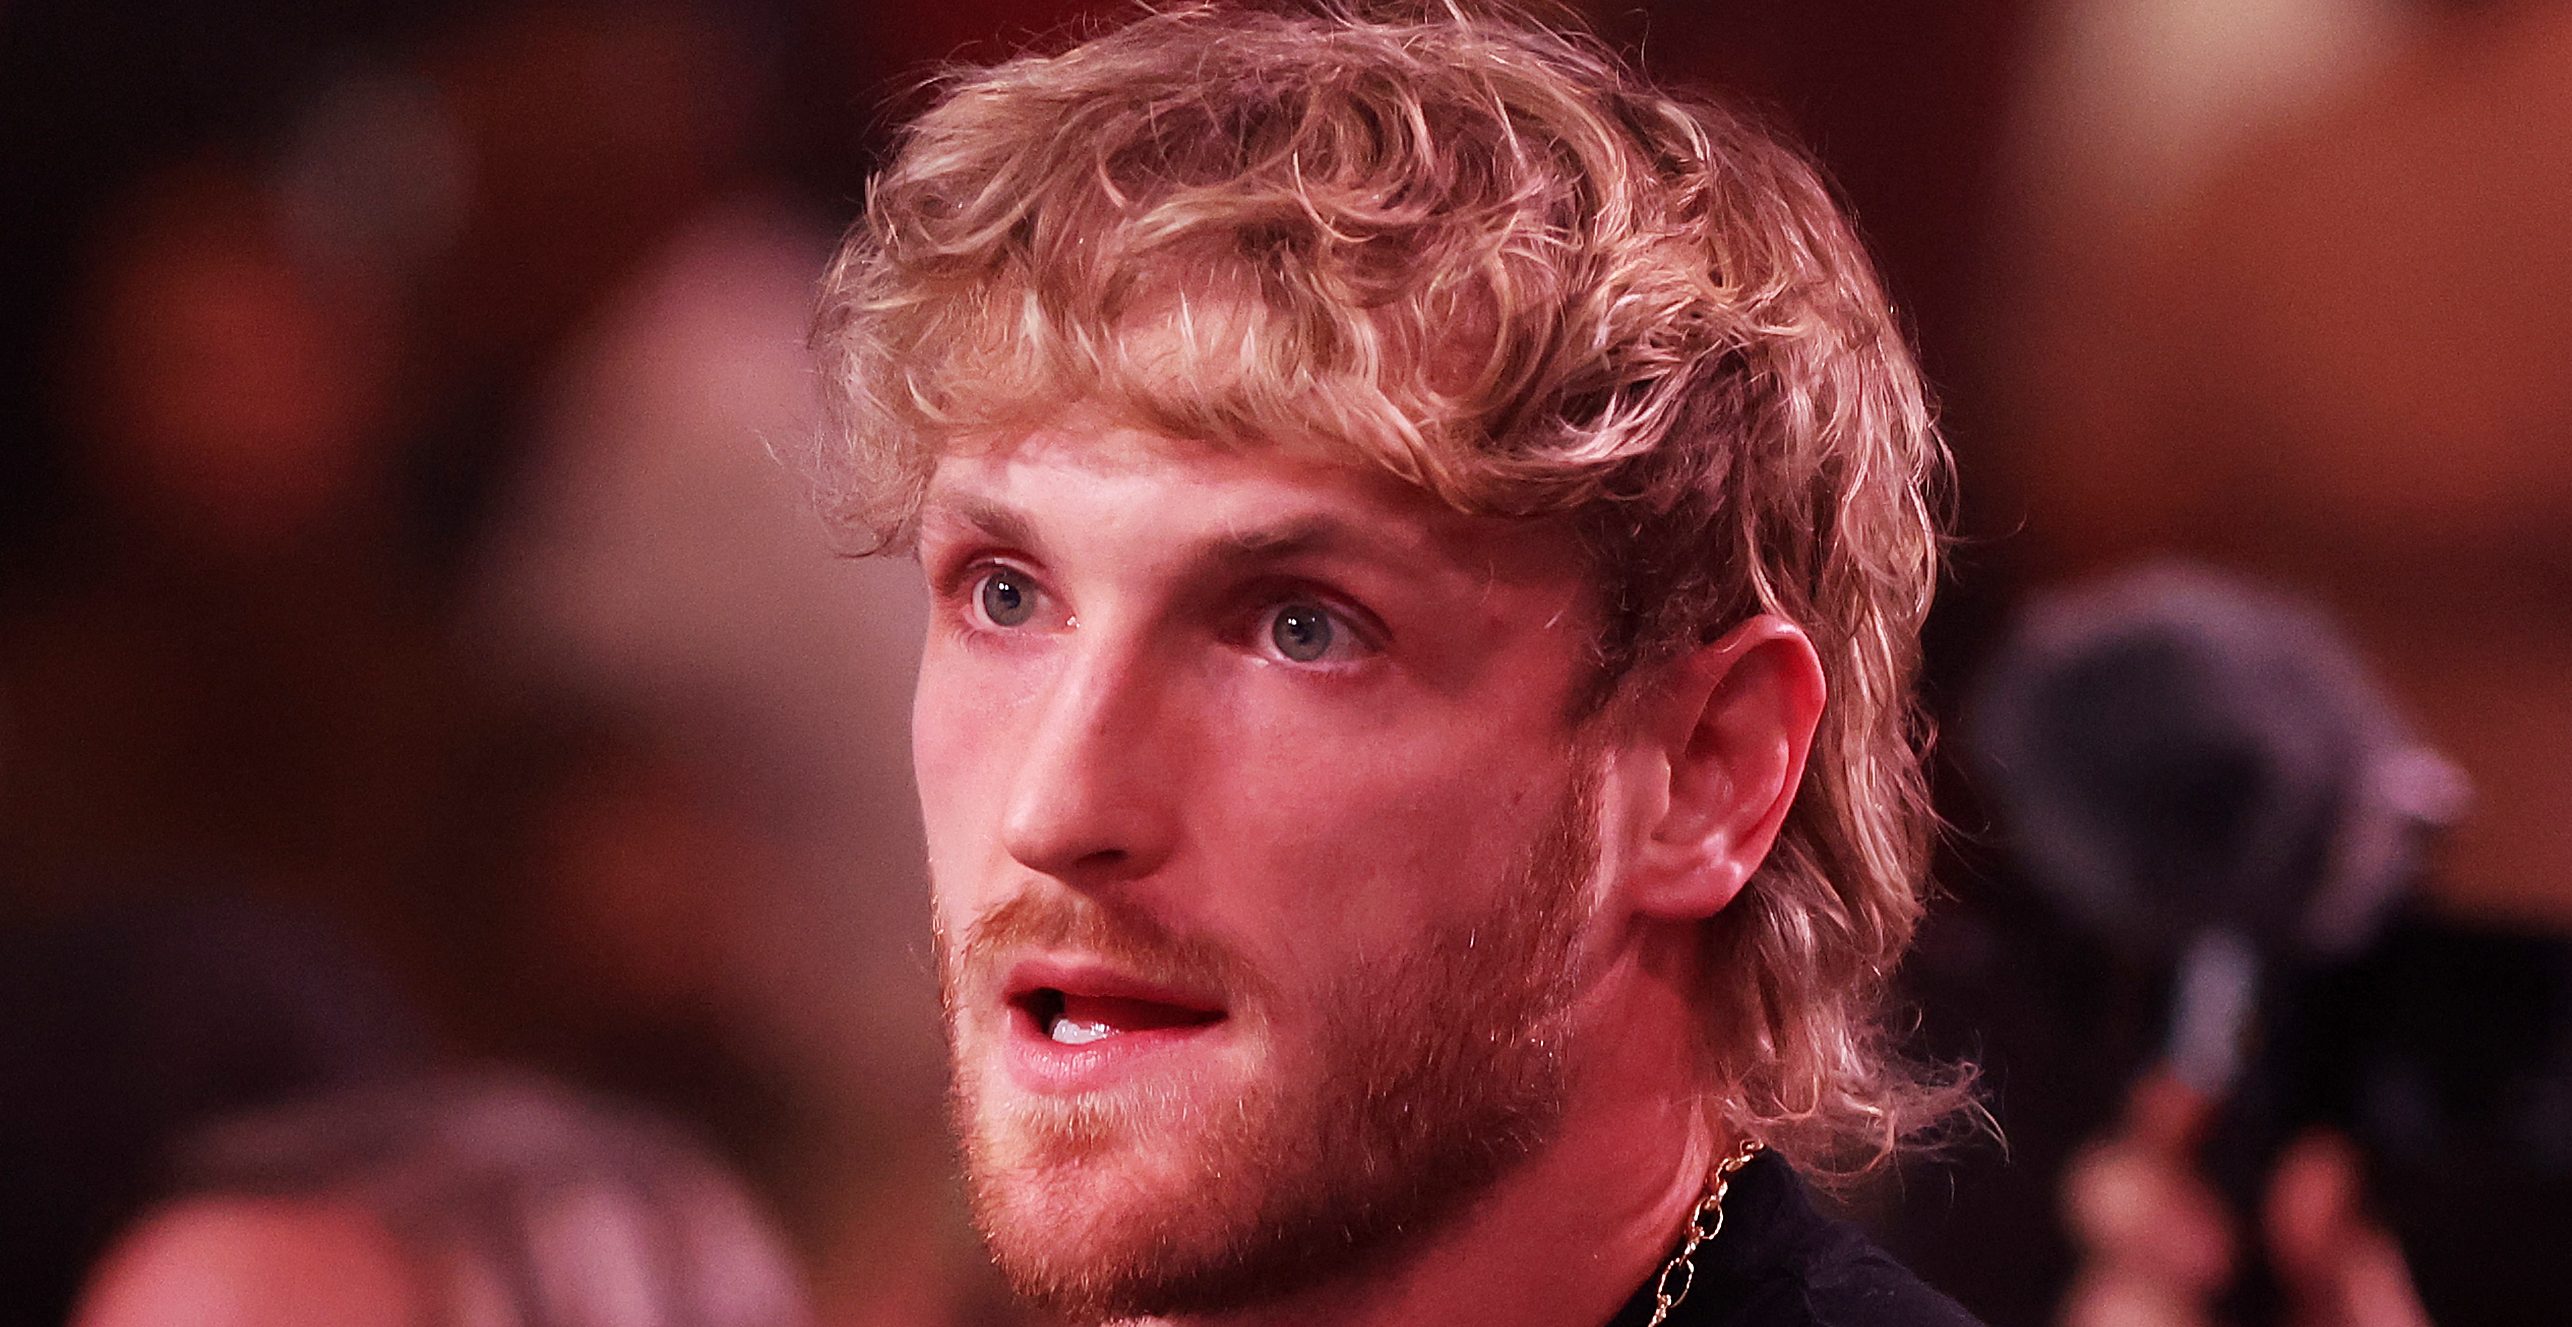 Logan Paul Apologizes For CryptoZoo Failure, Plans To Give Out Refunds